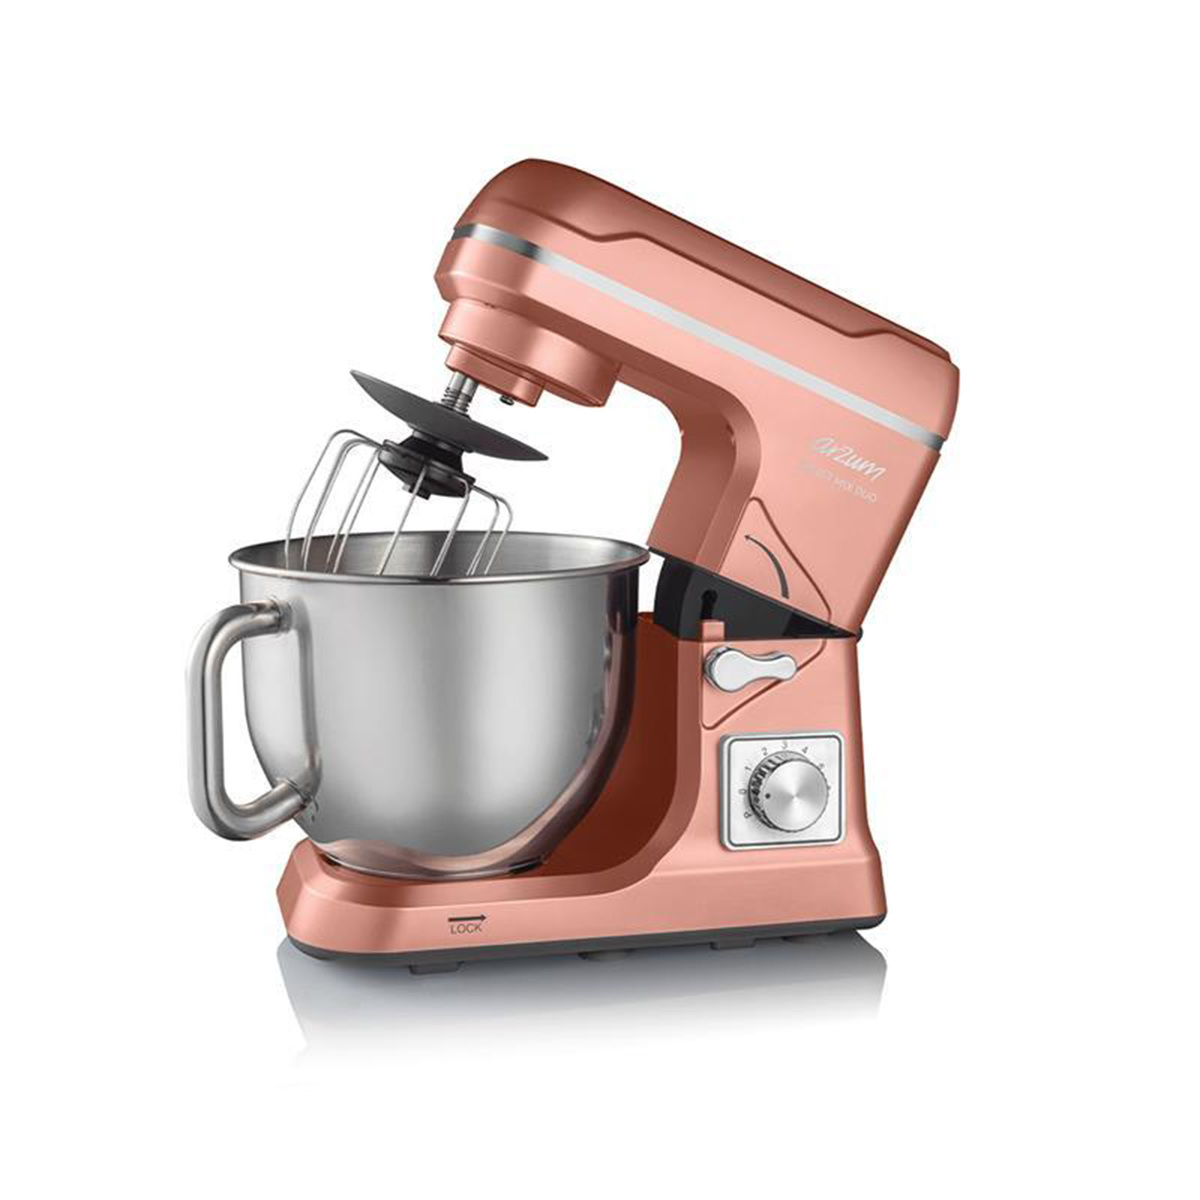 Arzum Crust Mix Duo Stand Mixer, 5 L Capacity, 1000 W, 6 Stage Speed, Sunset, AR1129-G